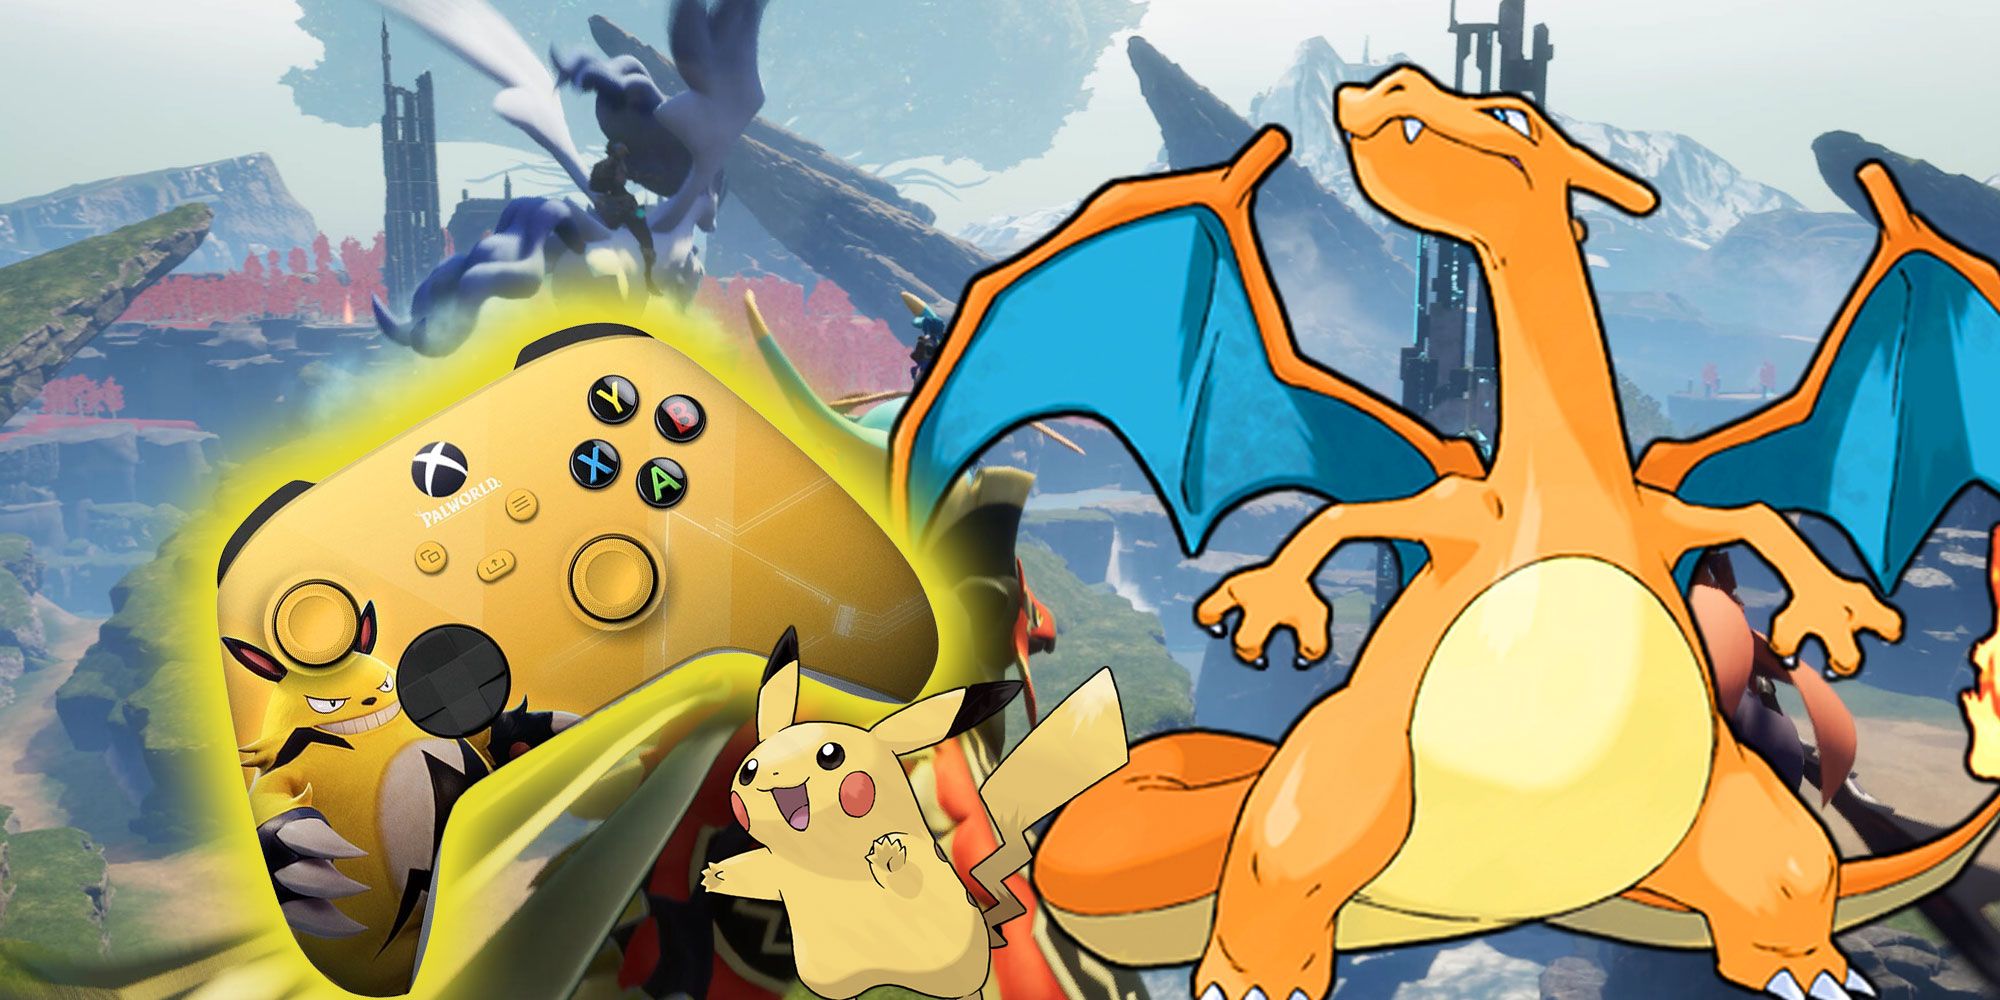 Palworld Controllers with Charizard and Pikachu. 